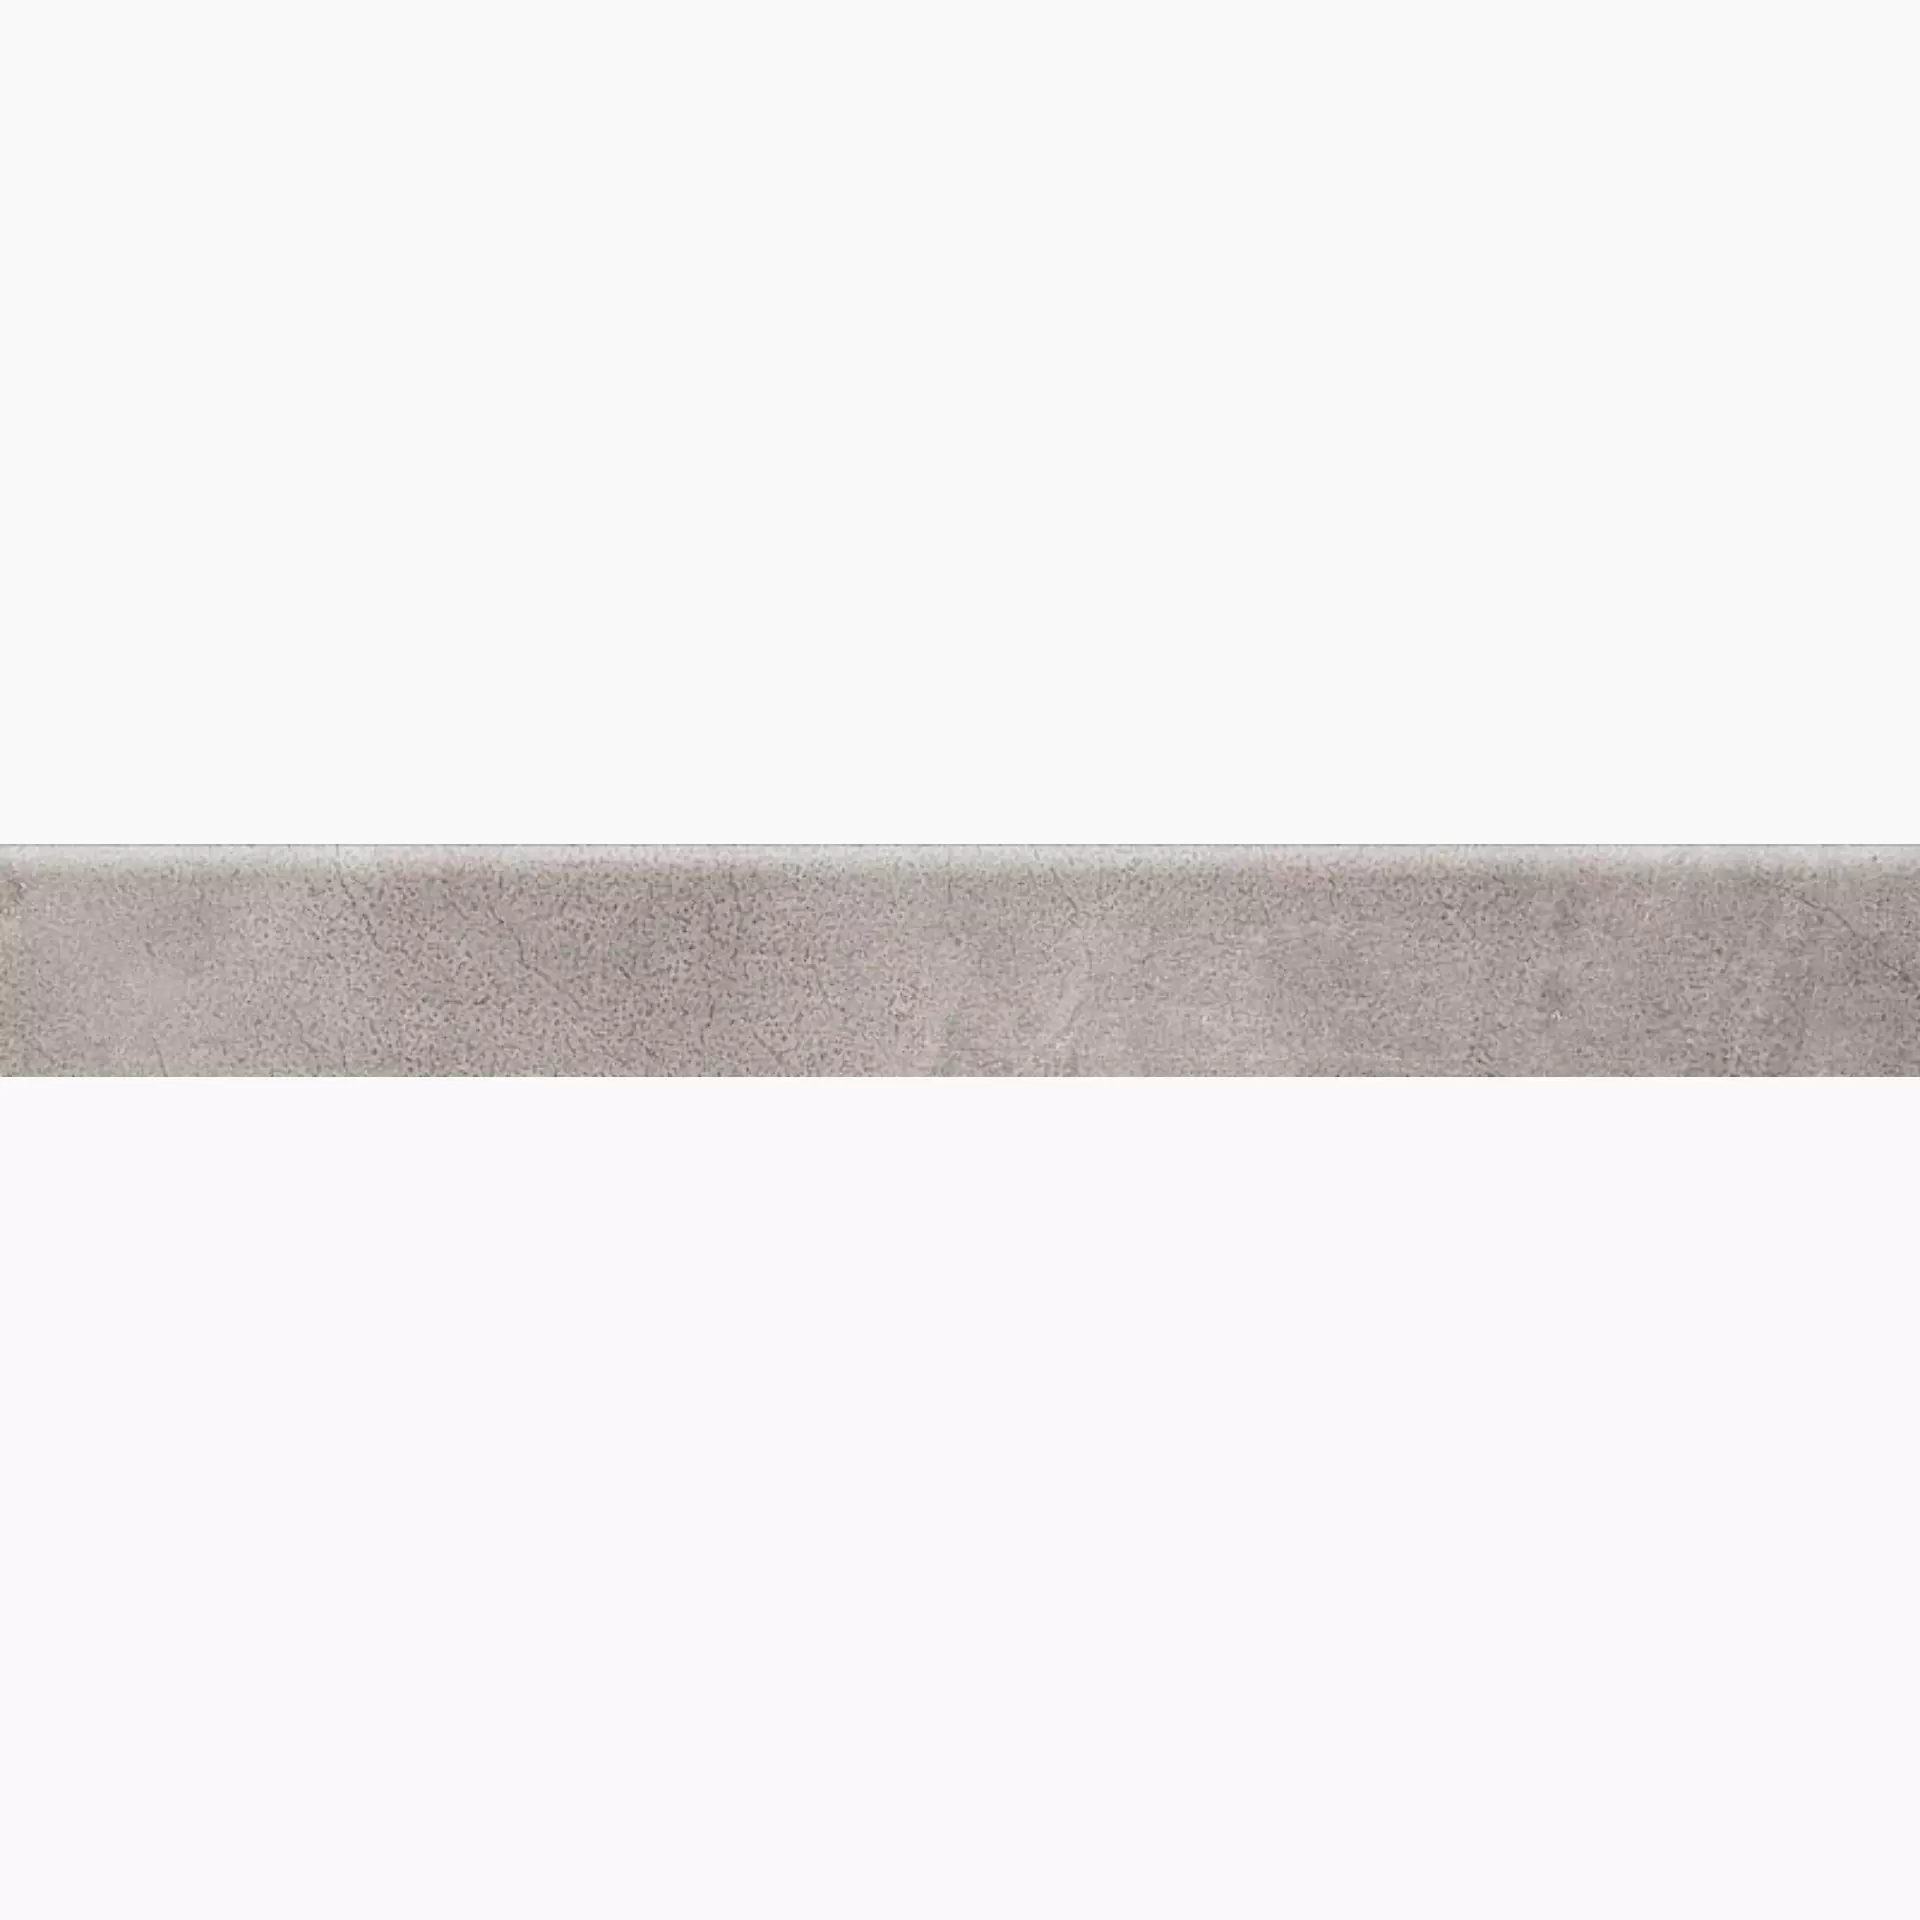 Sant Agostino Set Concrete Grey Natural Skirting board CSABSCGR60 7,3x60cm rectified 10mm